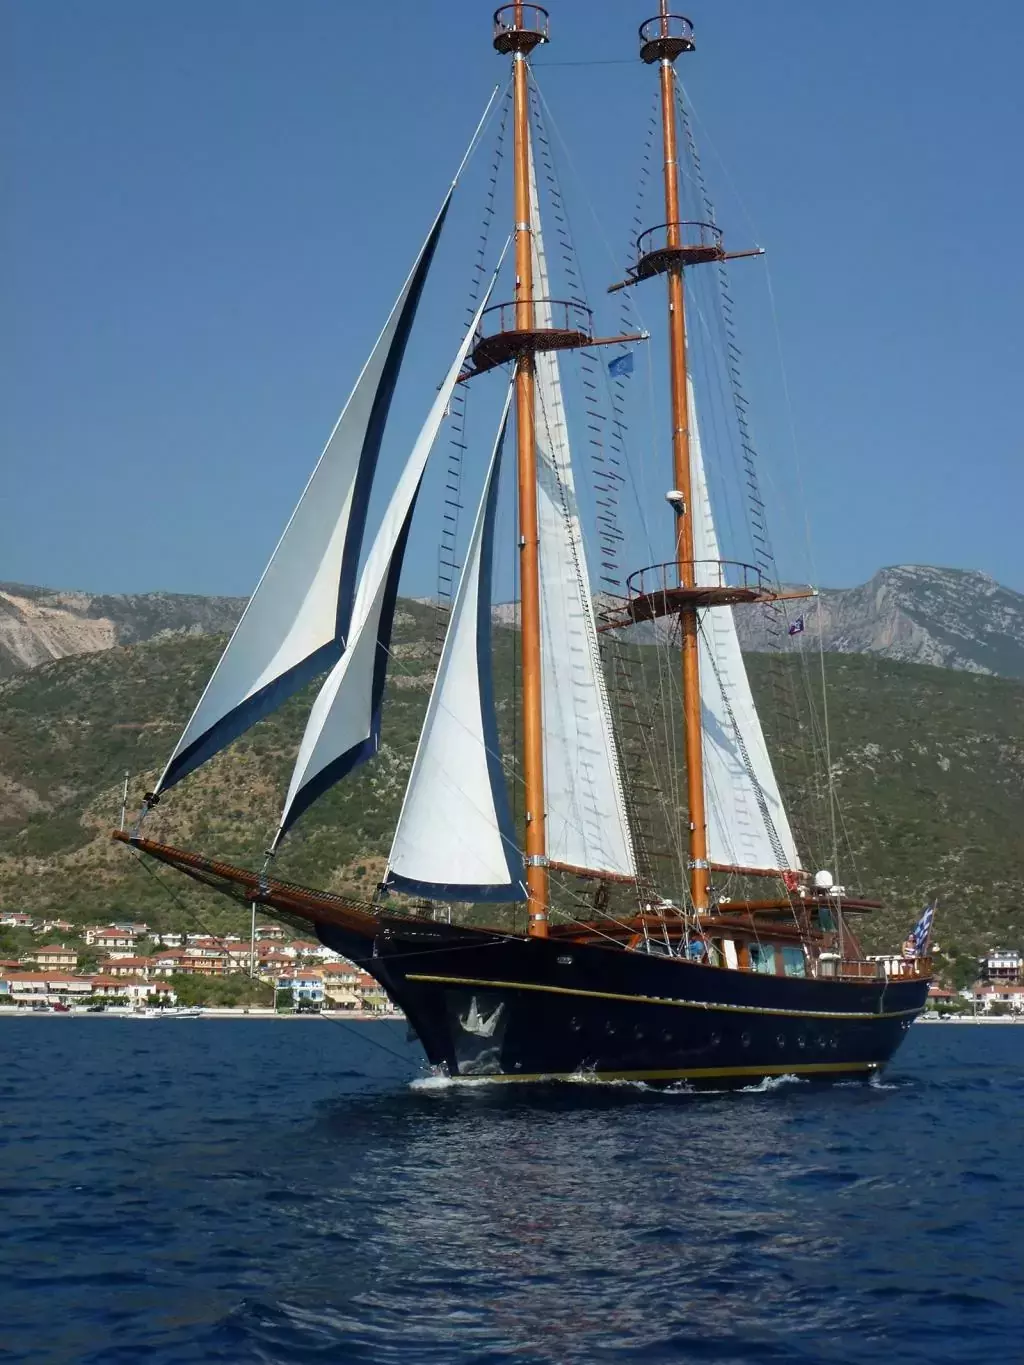 Blue Dream by Blue Sea Maritime - Top rates for a Charter of a private Motor Sailer in Greece